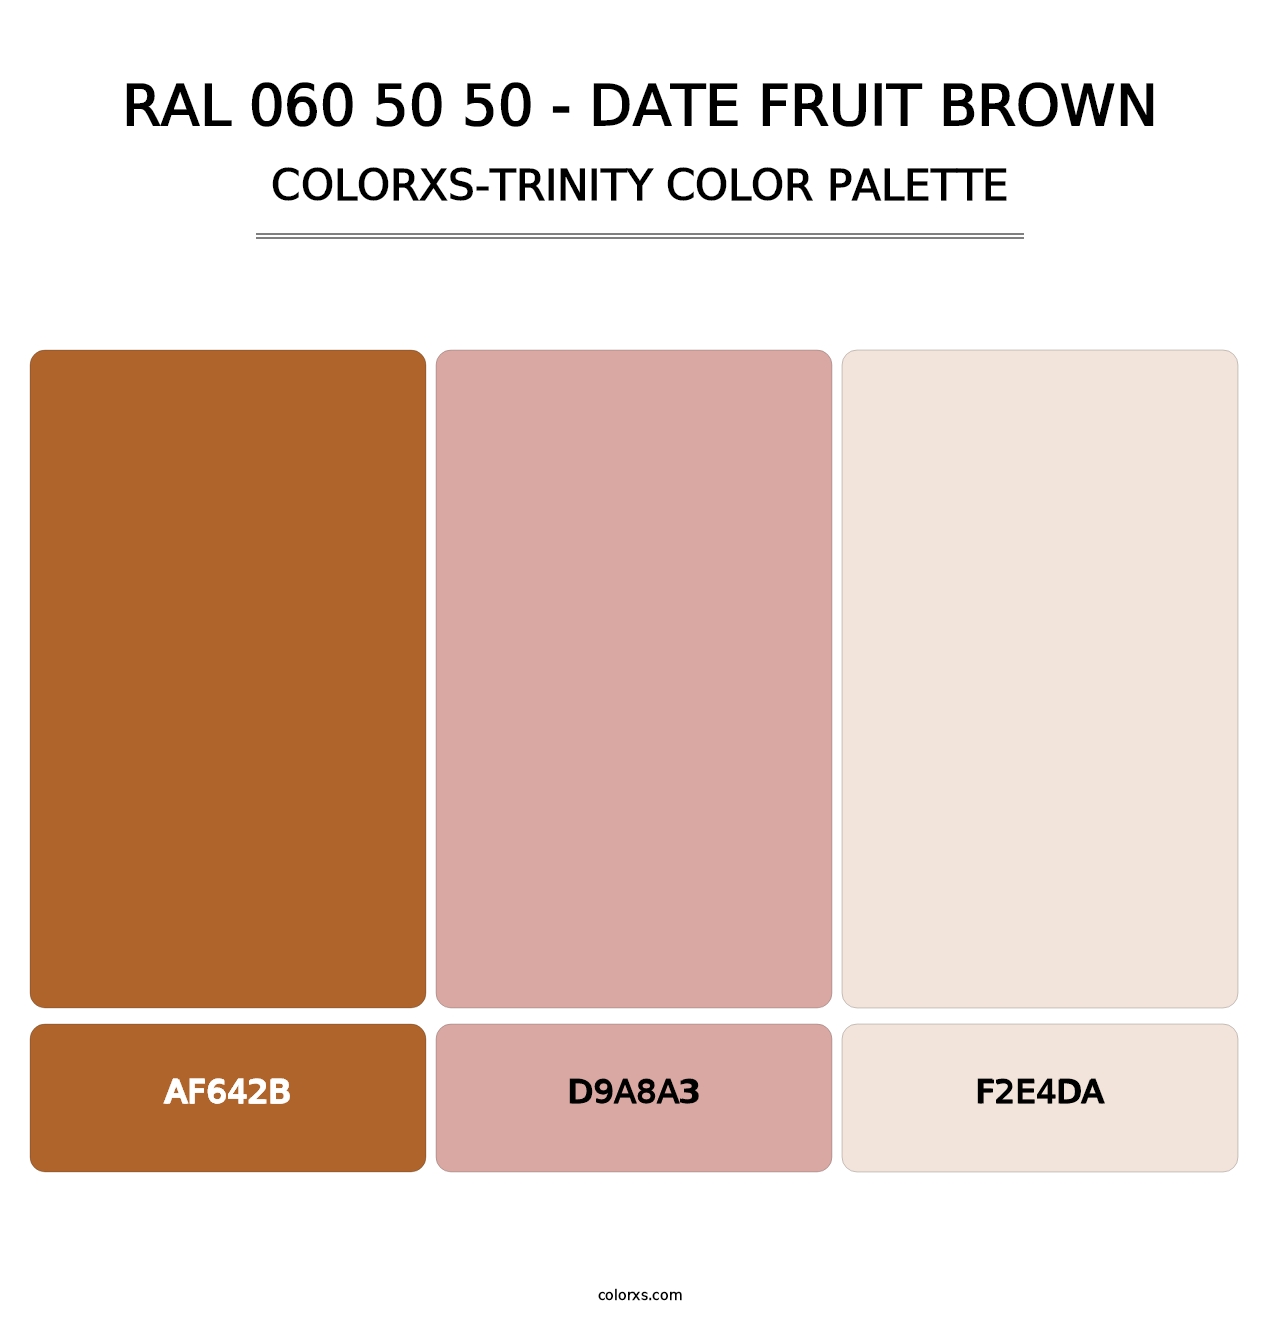 RAL 060 50 50 - Date Fruit Brown - Colorxs Trinity Palette